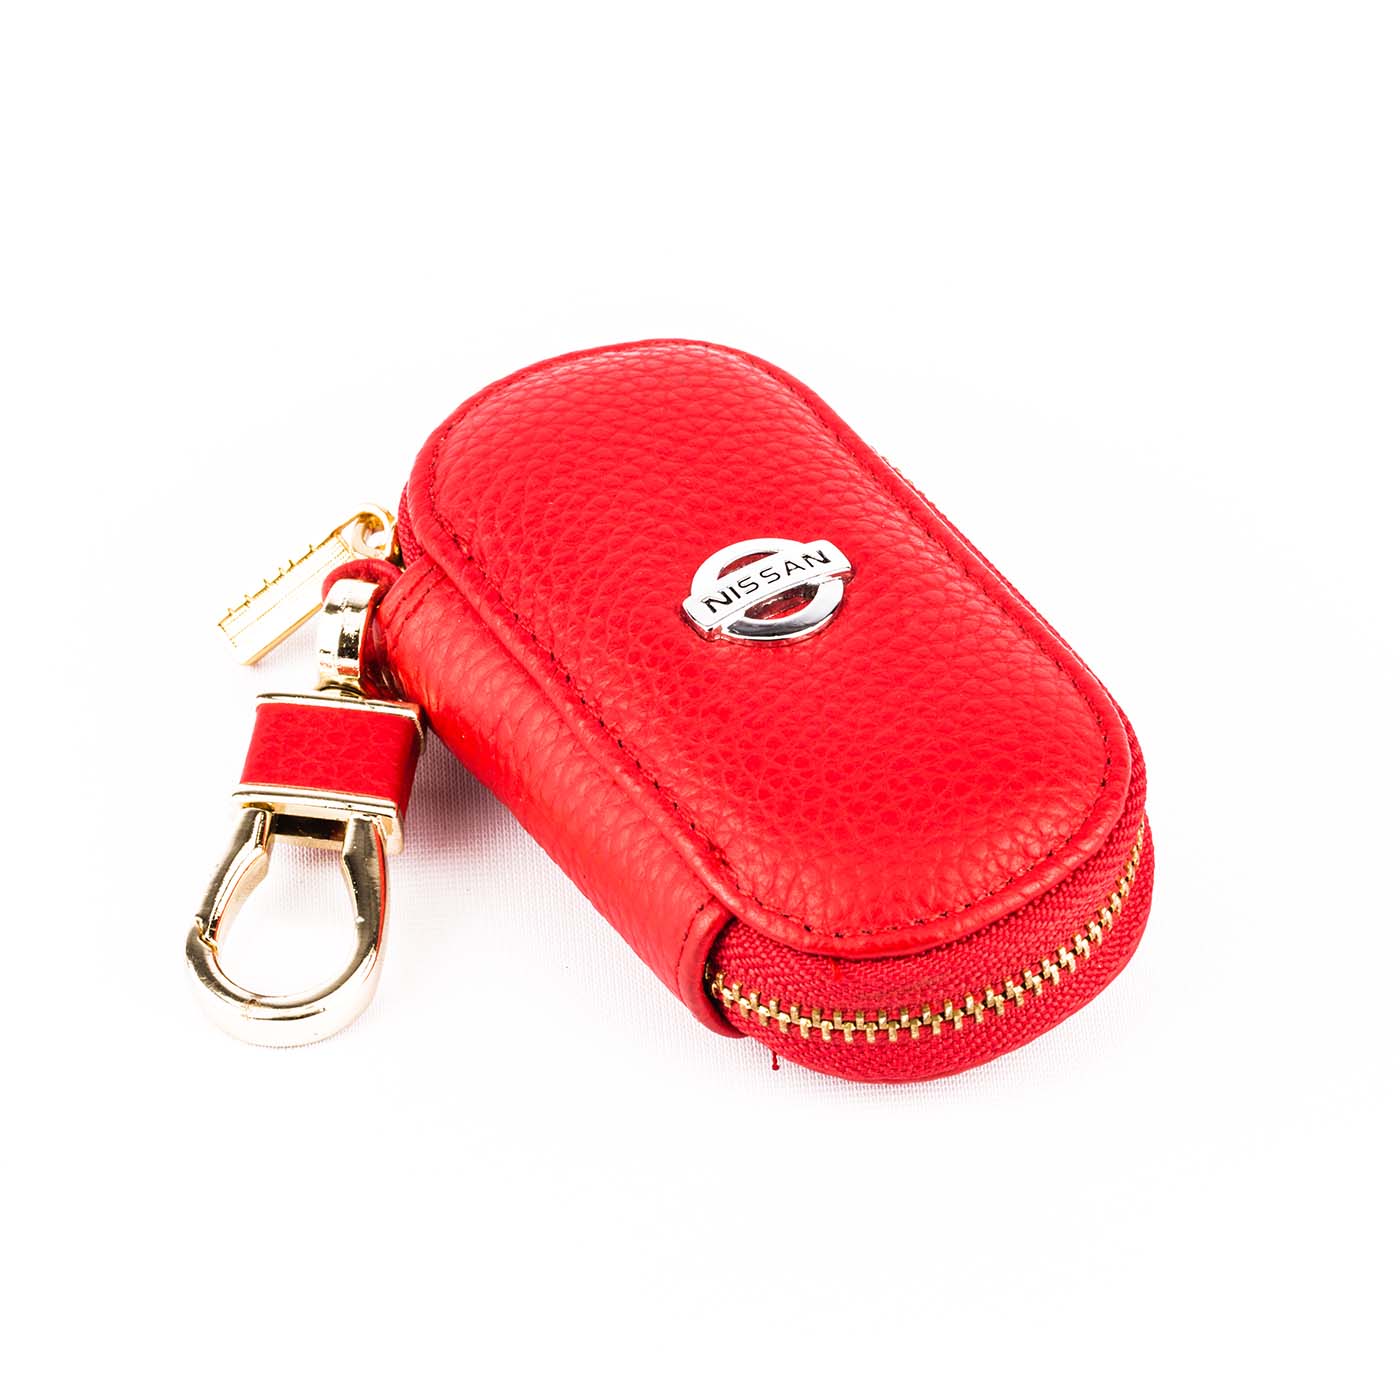 Nissan Red Key Chain